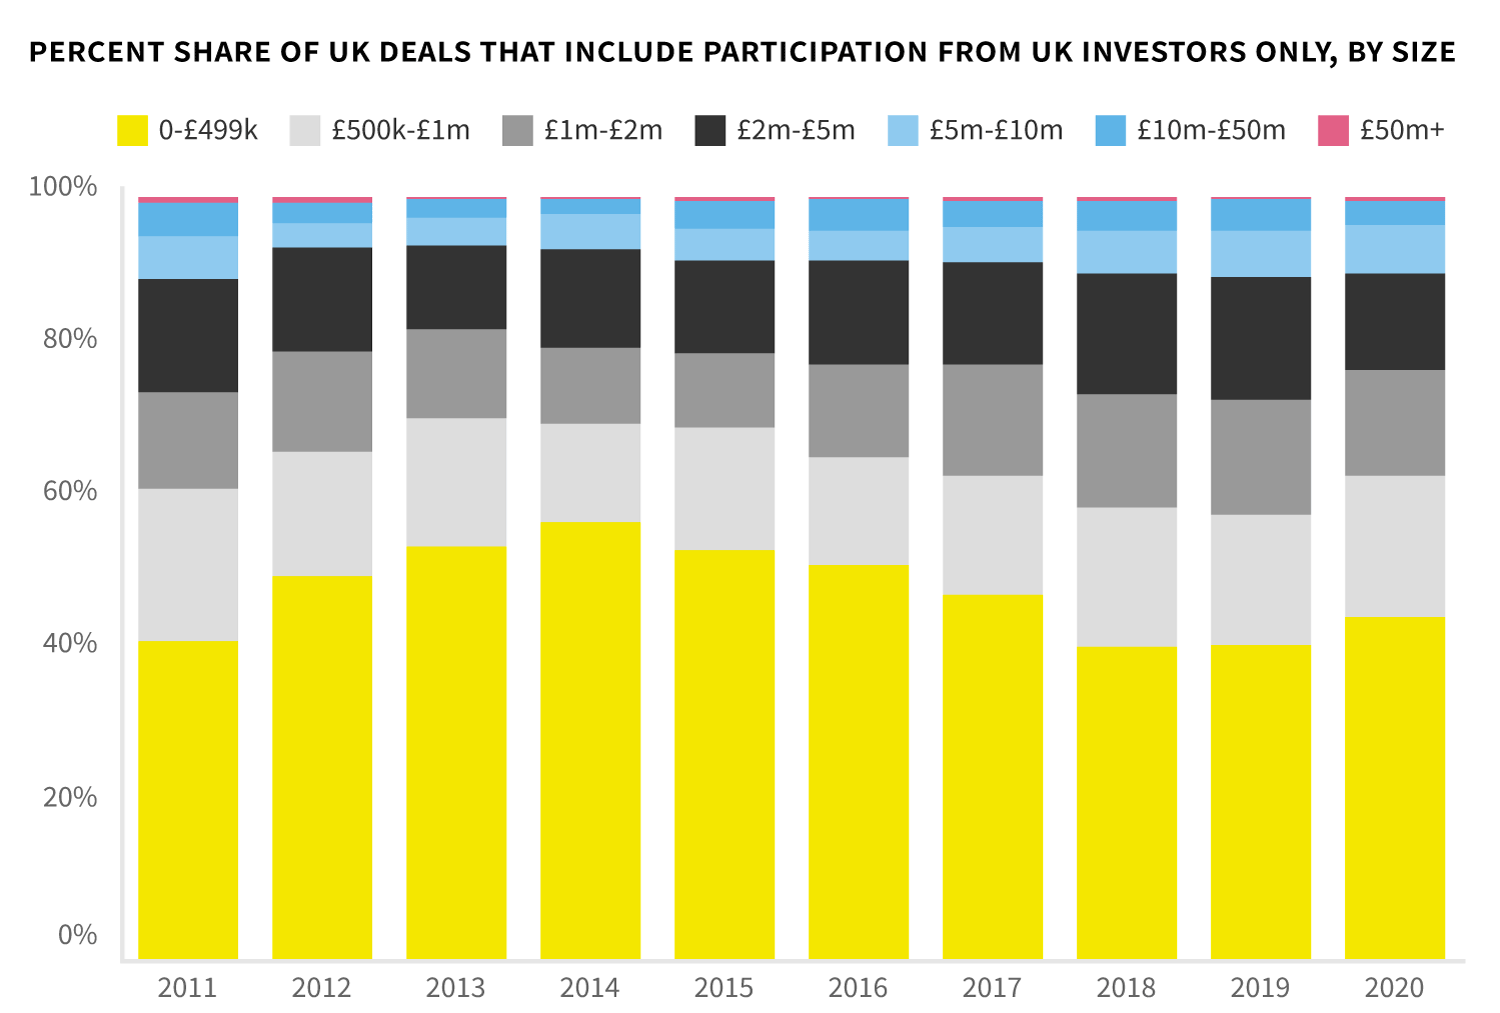 Distribution of deals by size, UK investors only